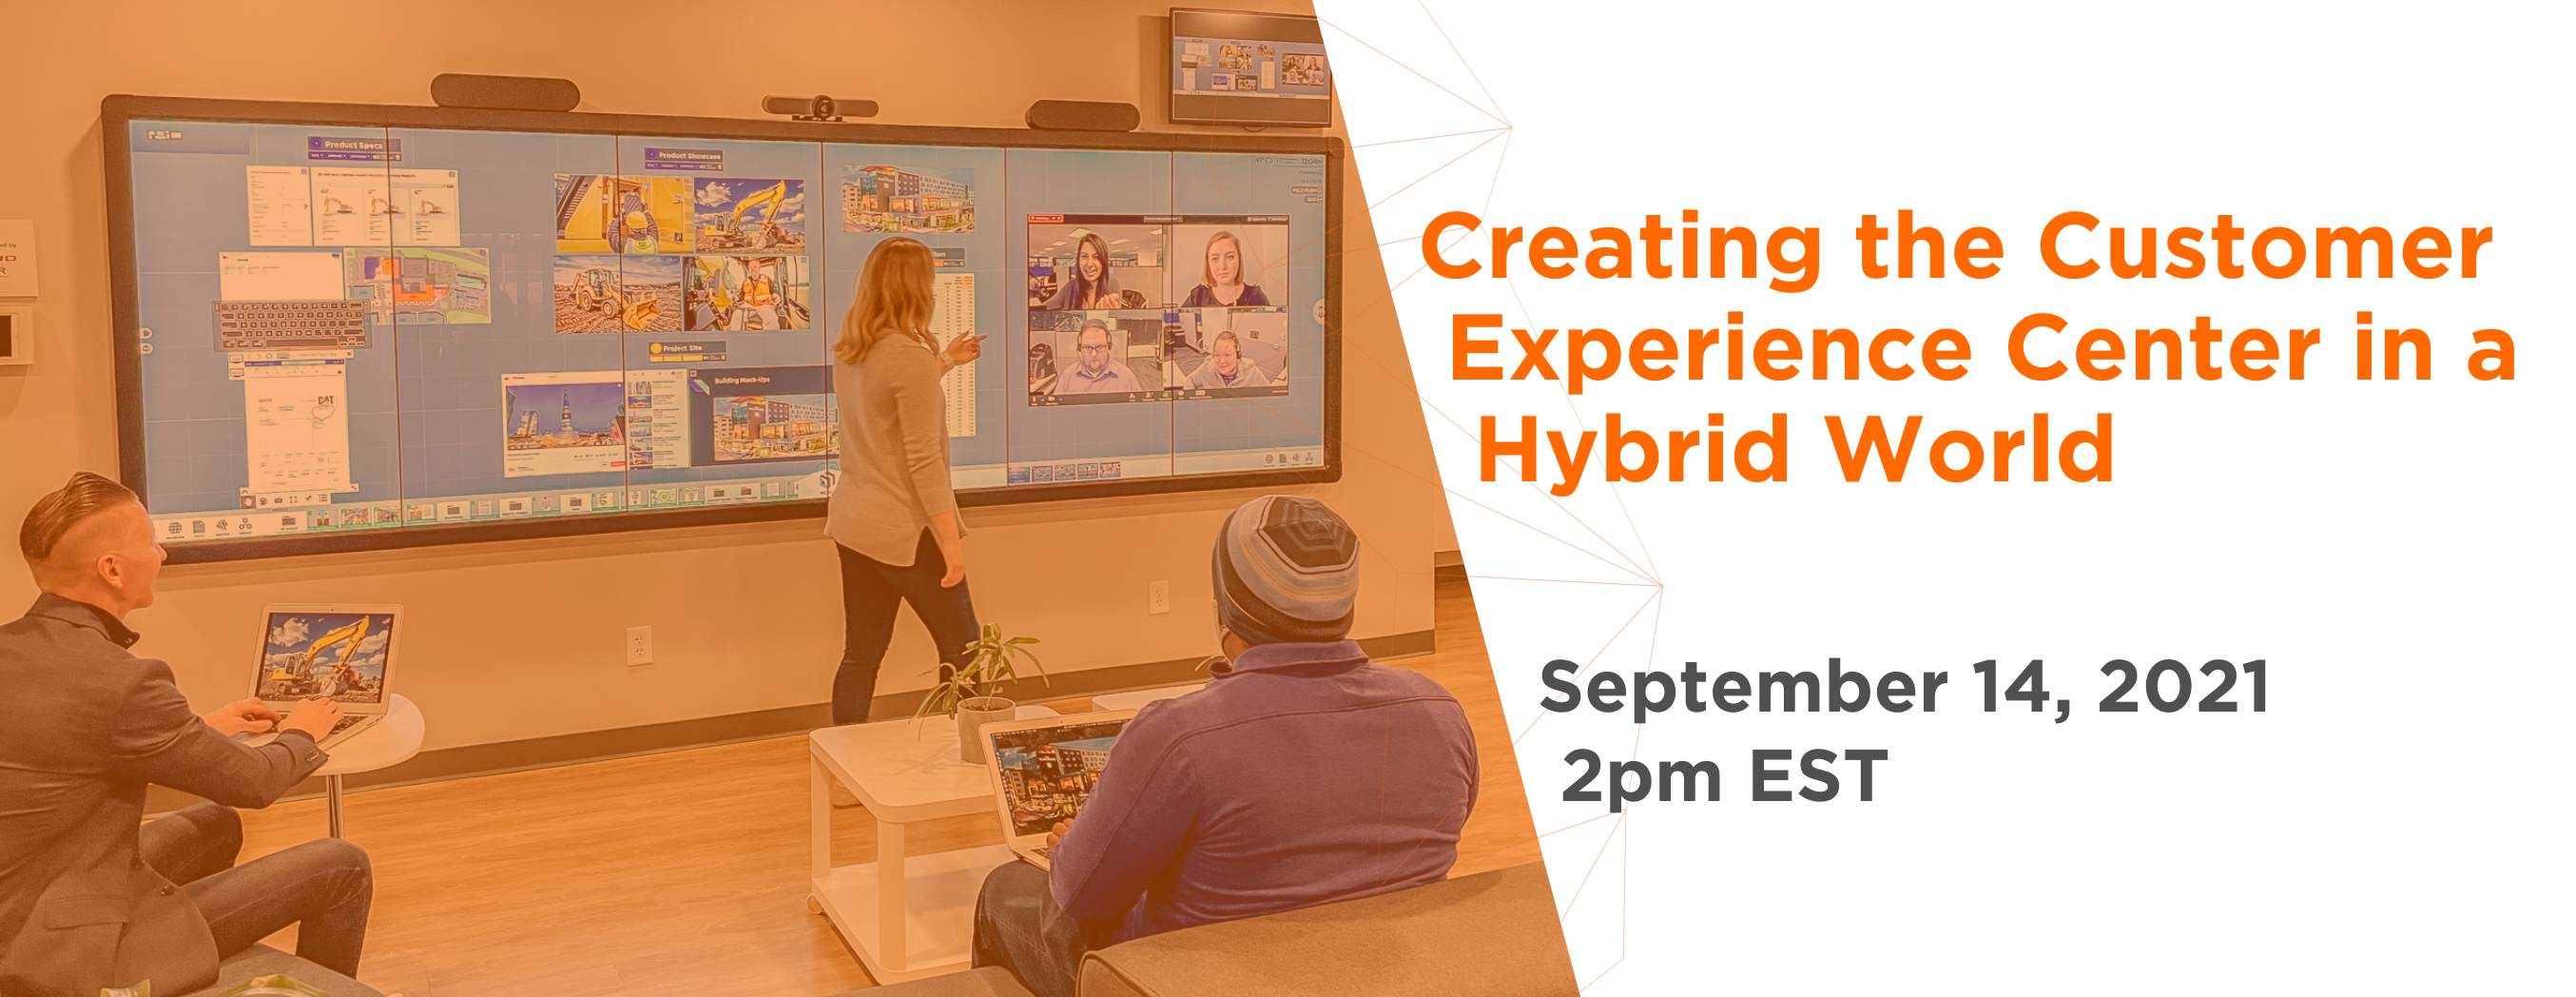 T1V-creating-the-customer-experience-center-in-a-hybrid-world-Webinar-09-14-21-Email